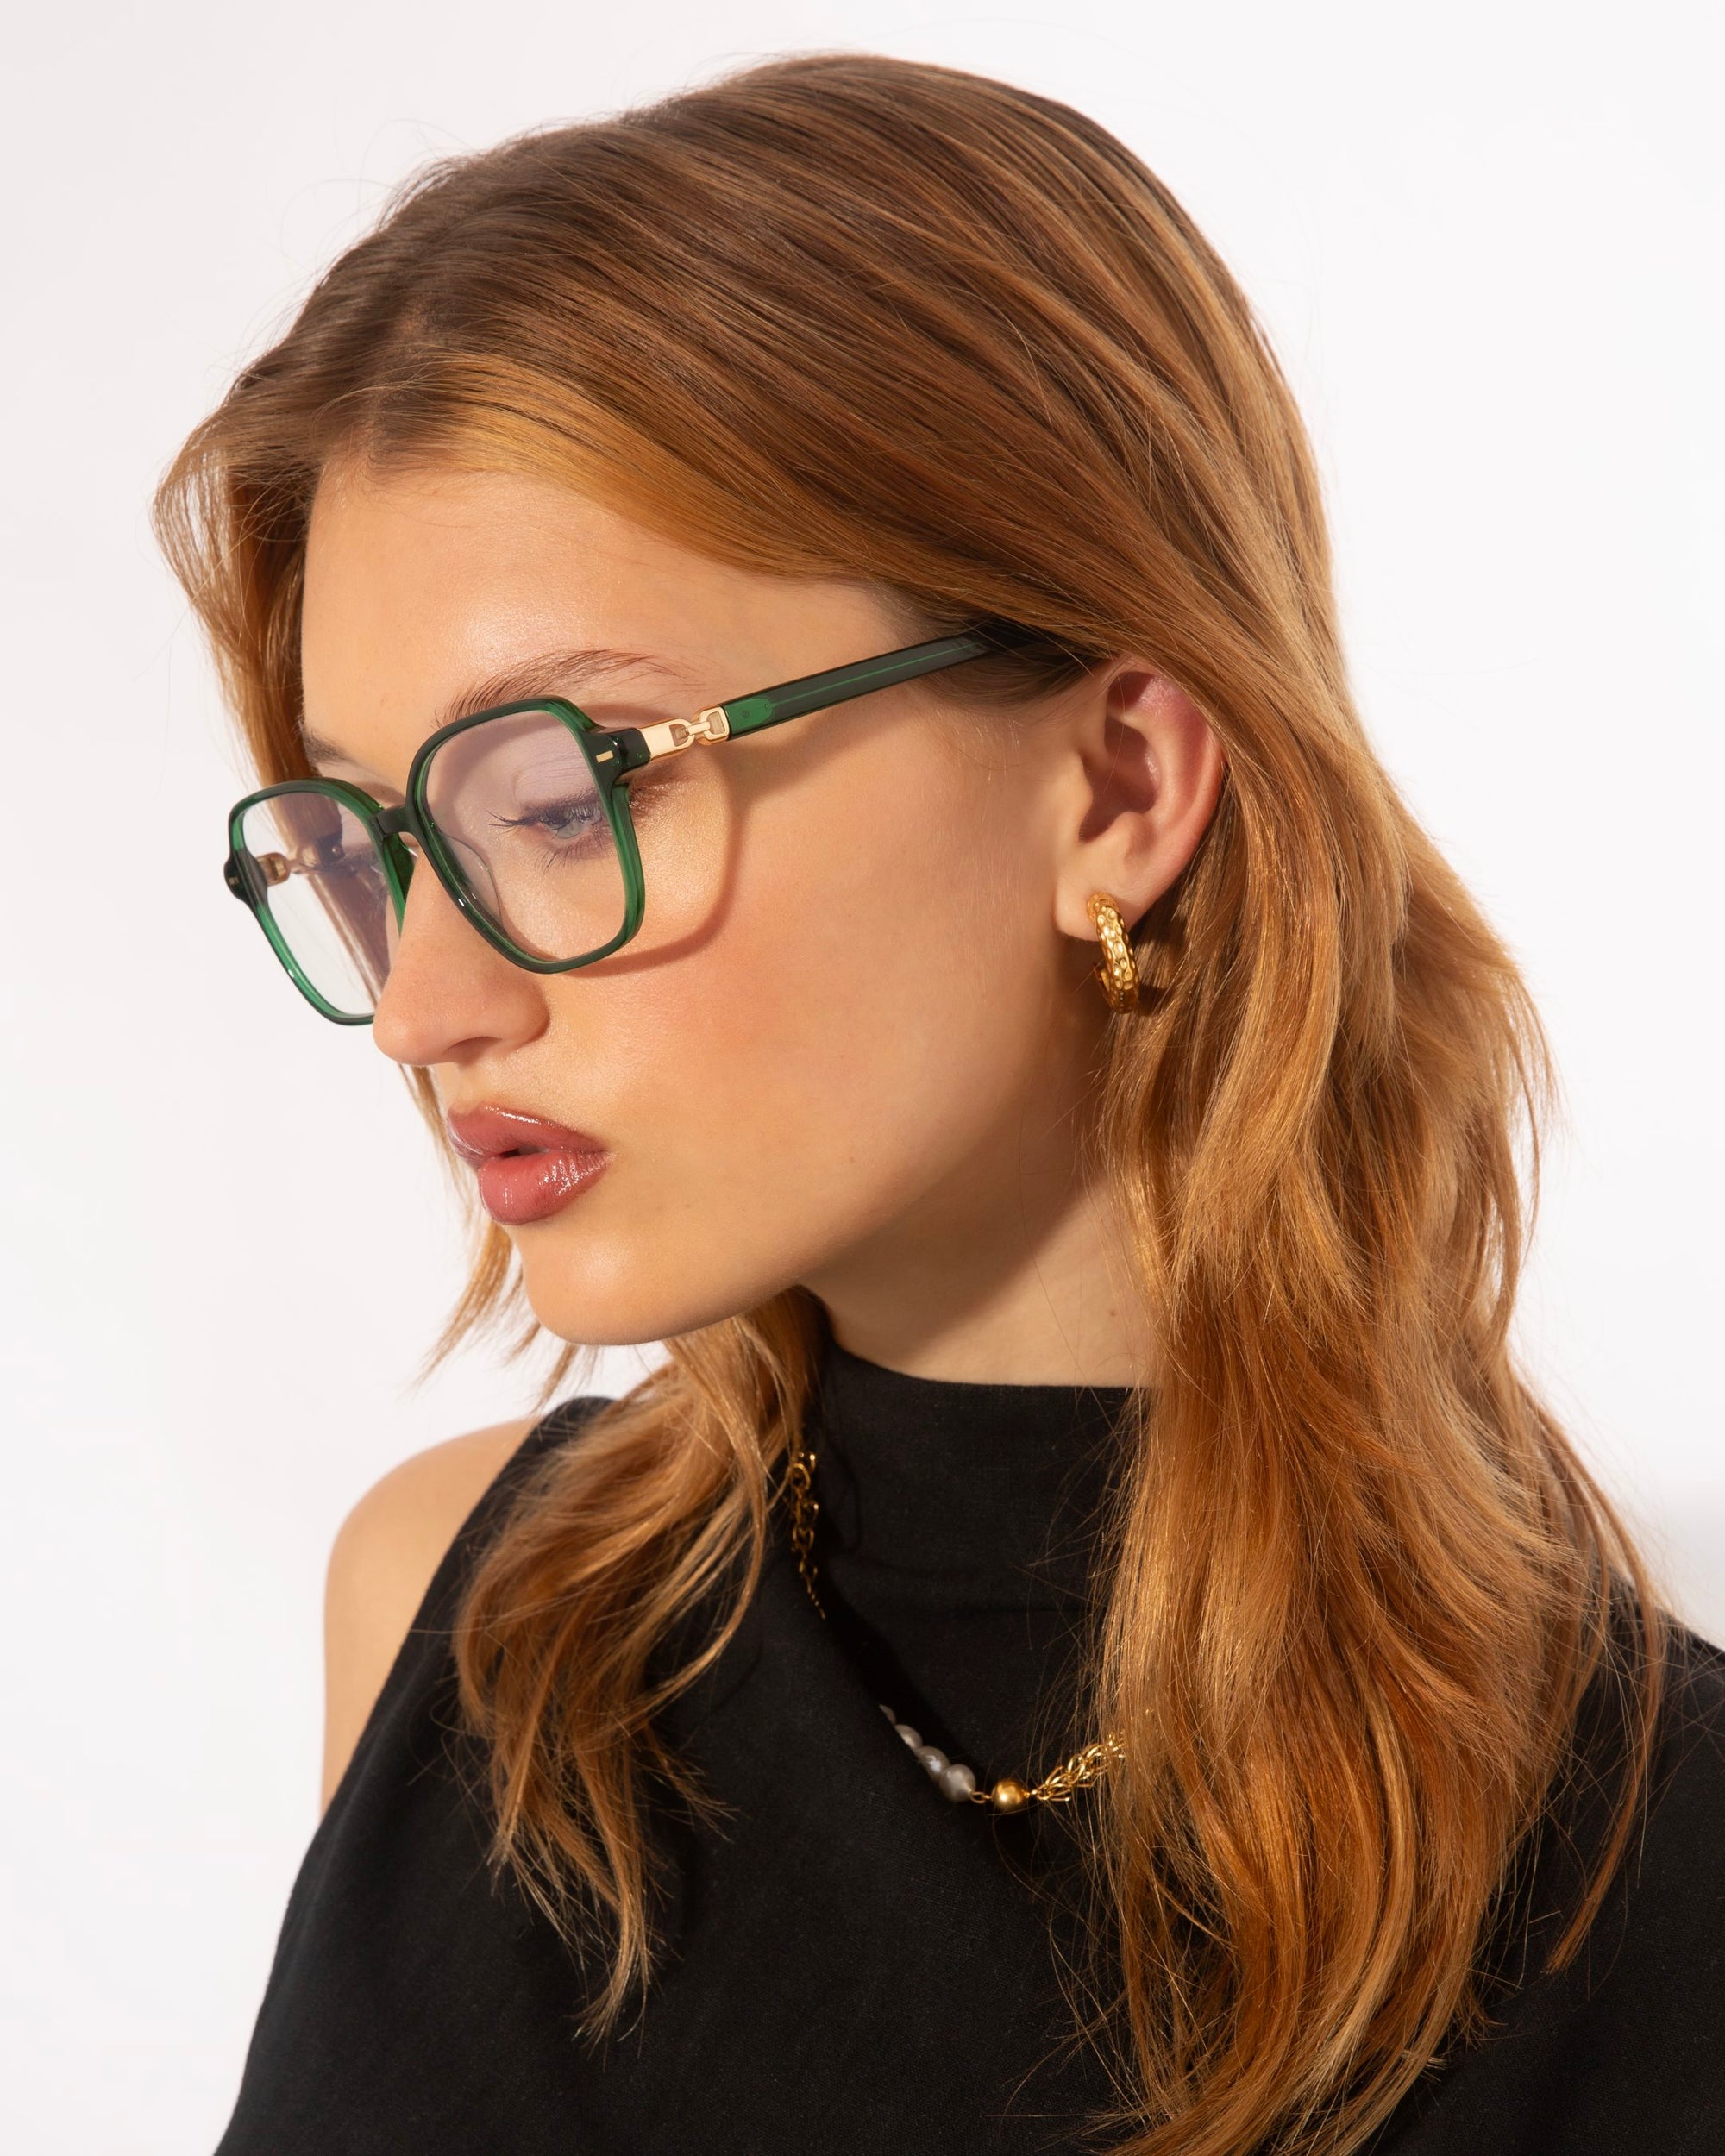 A woman with long, red hair is shown in a profile view against a plain background. She is wearing green-framed Charm glasses by For Art&#39;s Sake®, gold hoop earrings, and a black sleeveless top. Her serious expression is accentuated by her slightly parted lips.